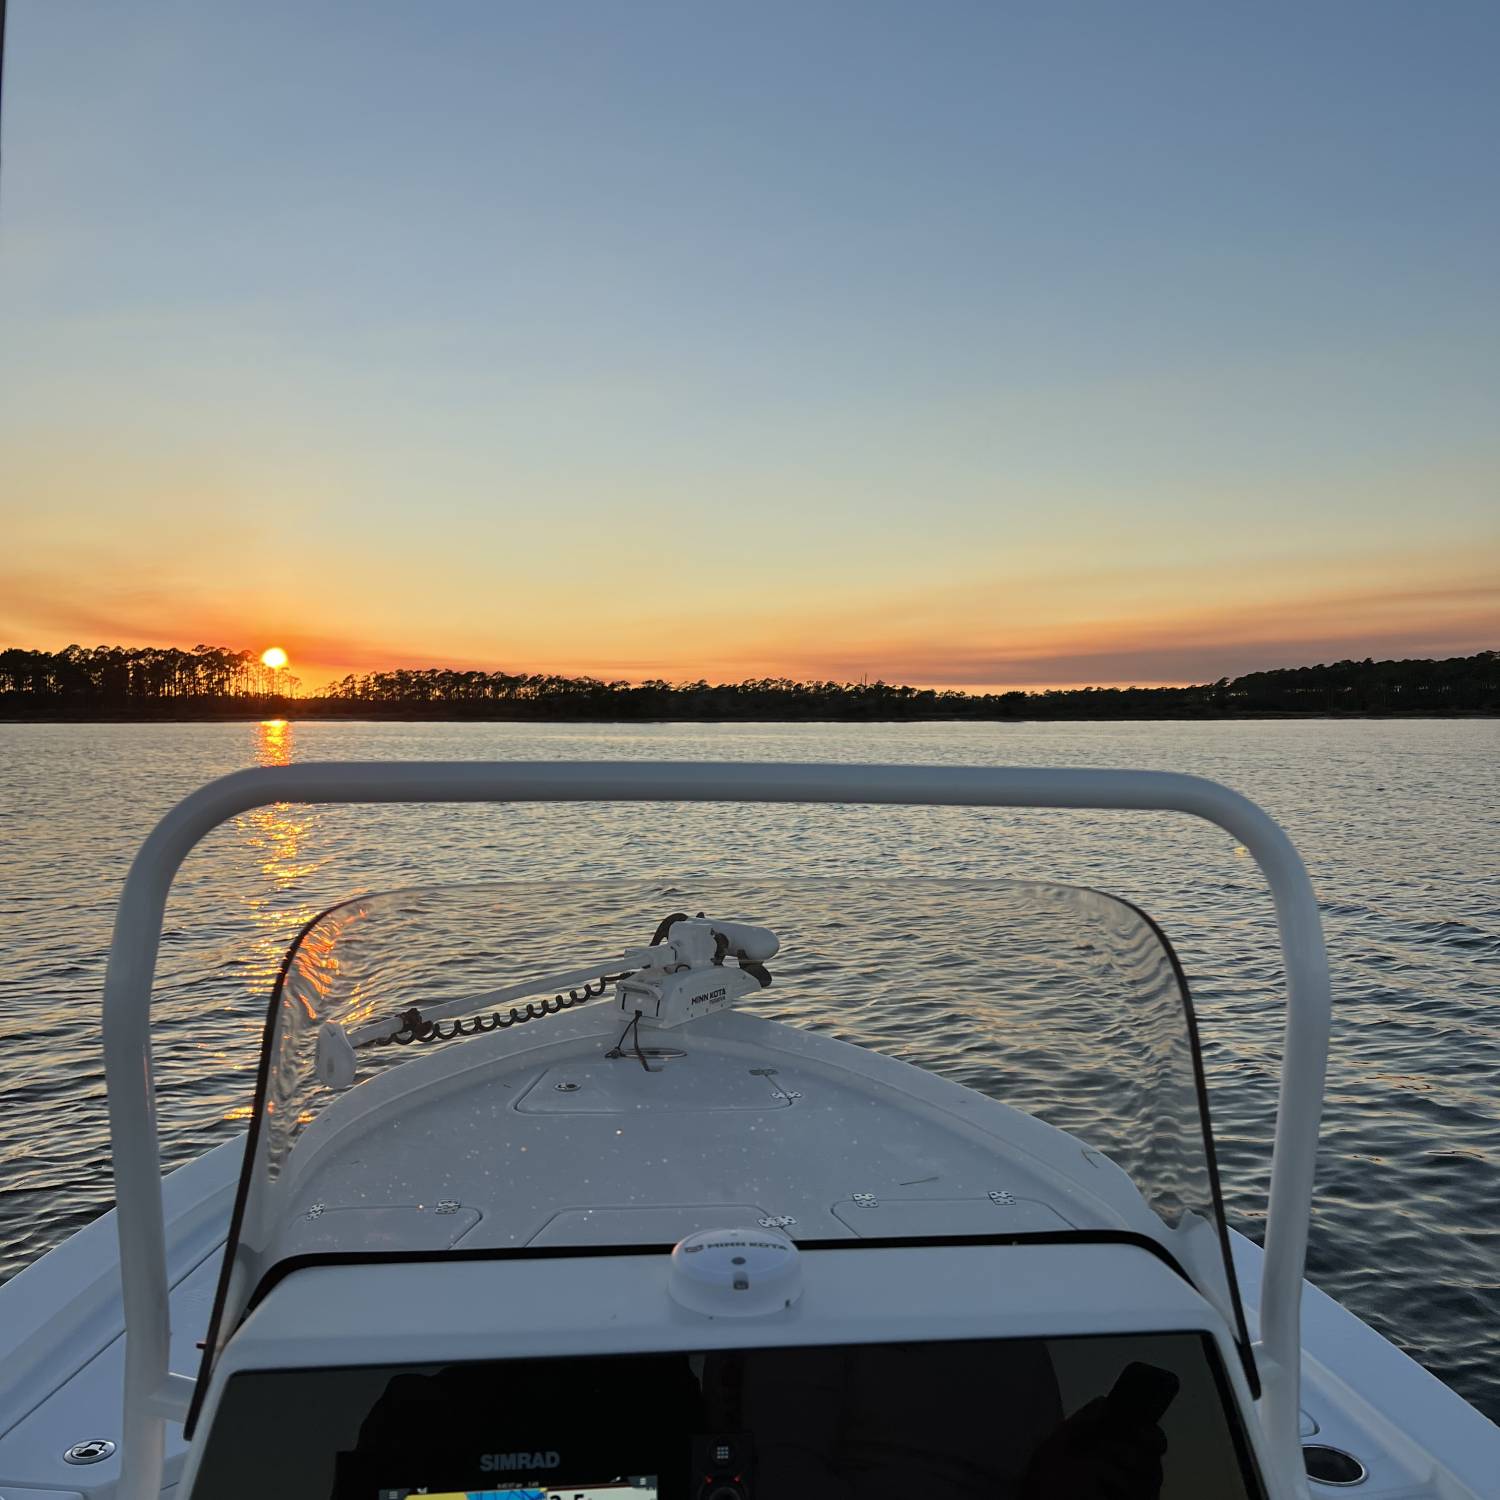 Title: Sunsets - On board their Sportsman Tournament 214 Bay Boat - Location: Panama City Beach FL. Participating in the Photo Contest #SportsmanJanuary2023